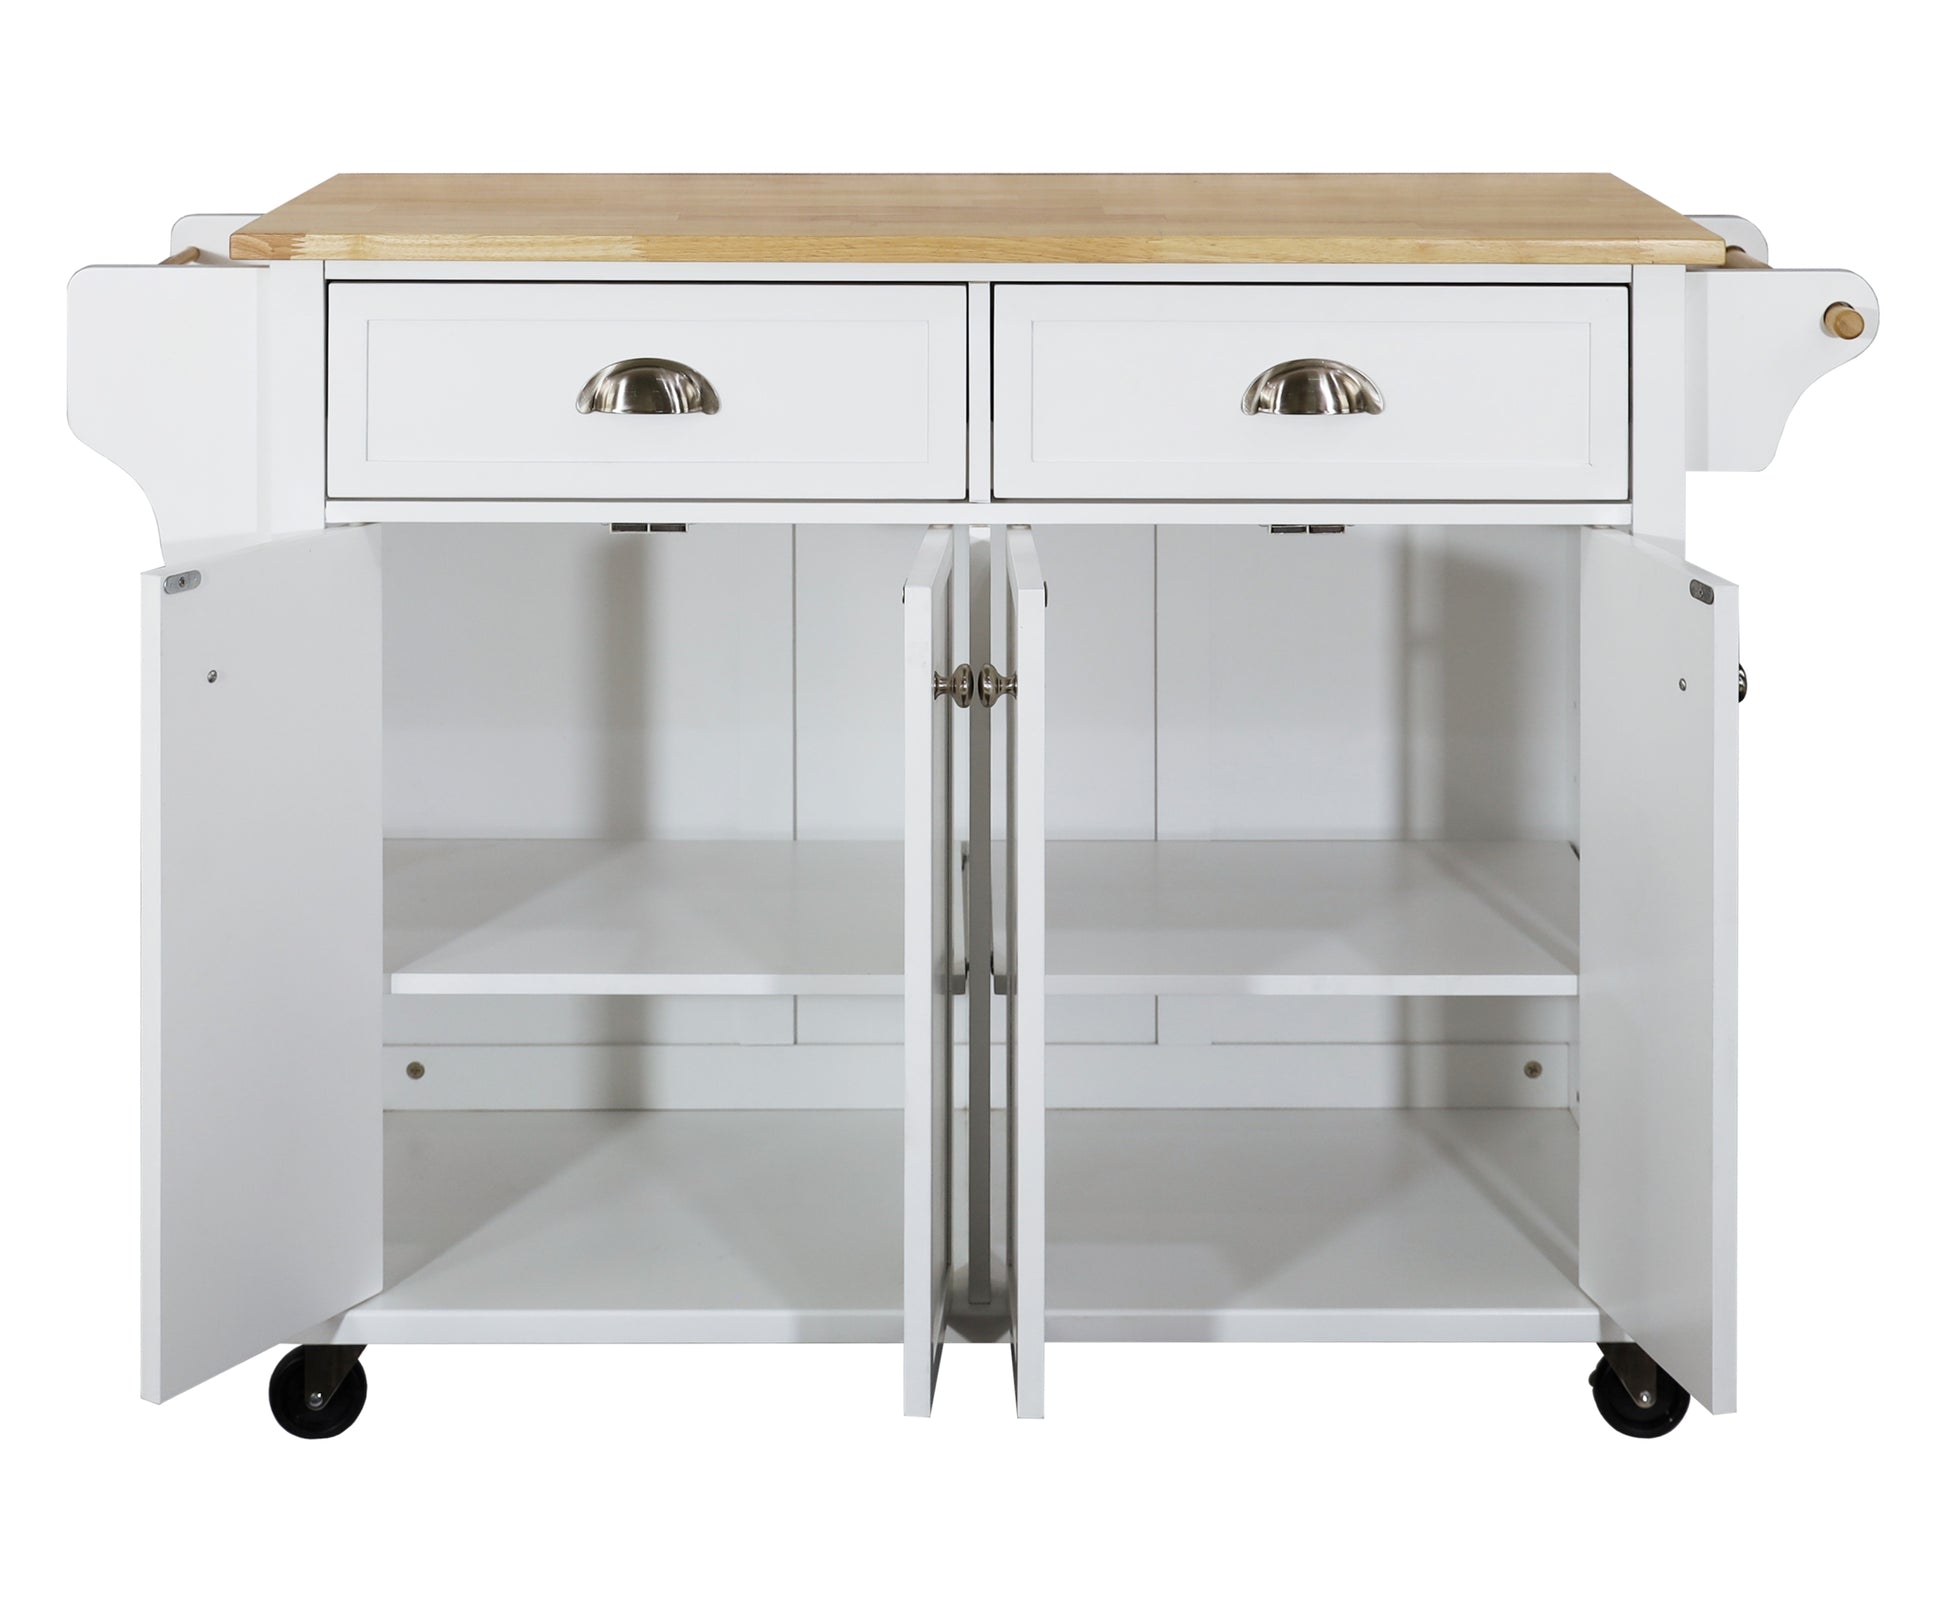 Cambridge Natural Wood Top Kitchen Island with Storage white-solid wood+mdf